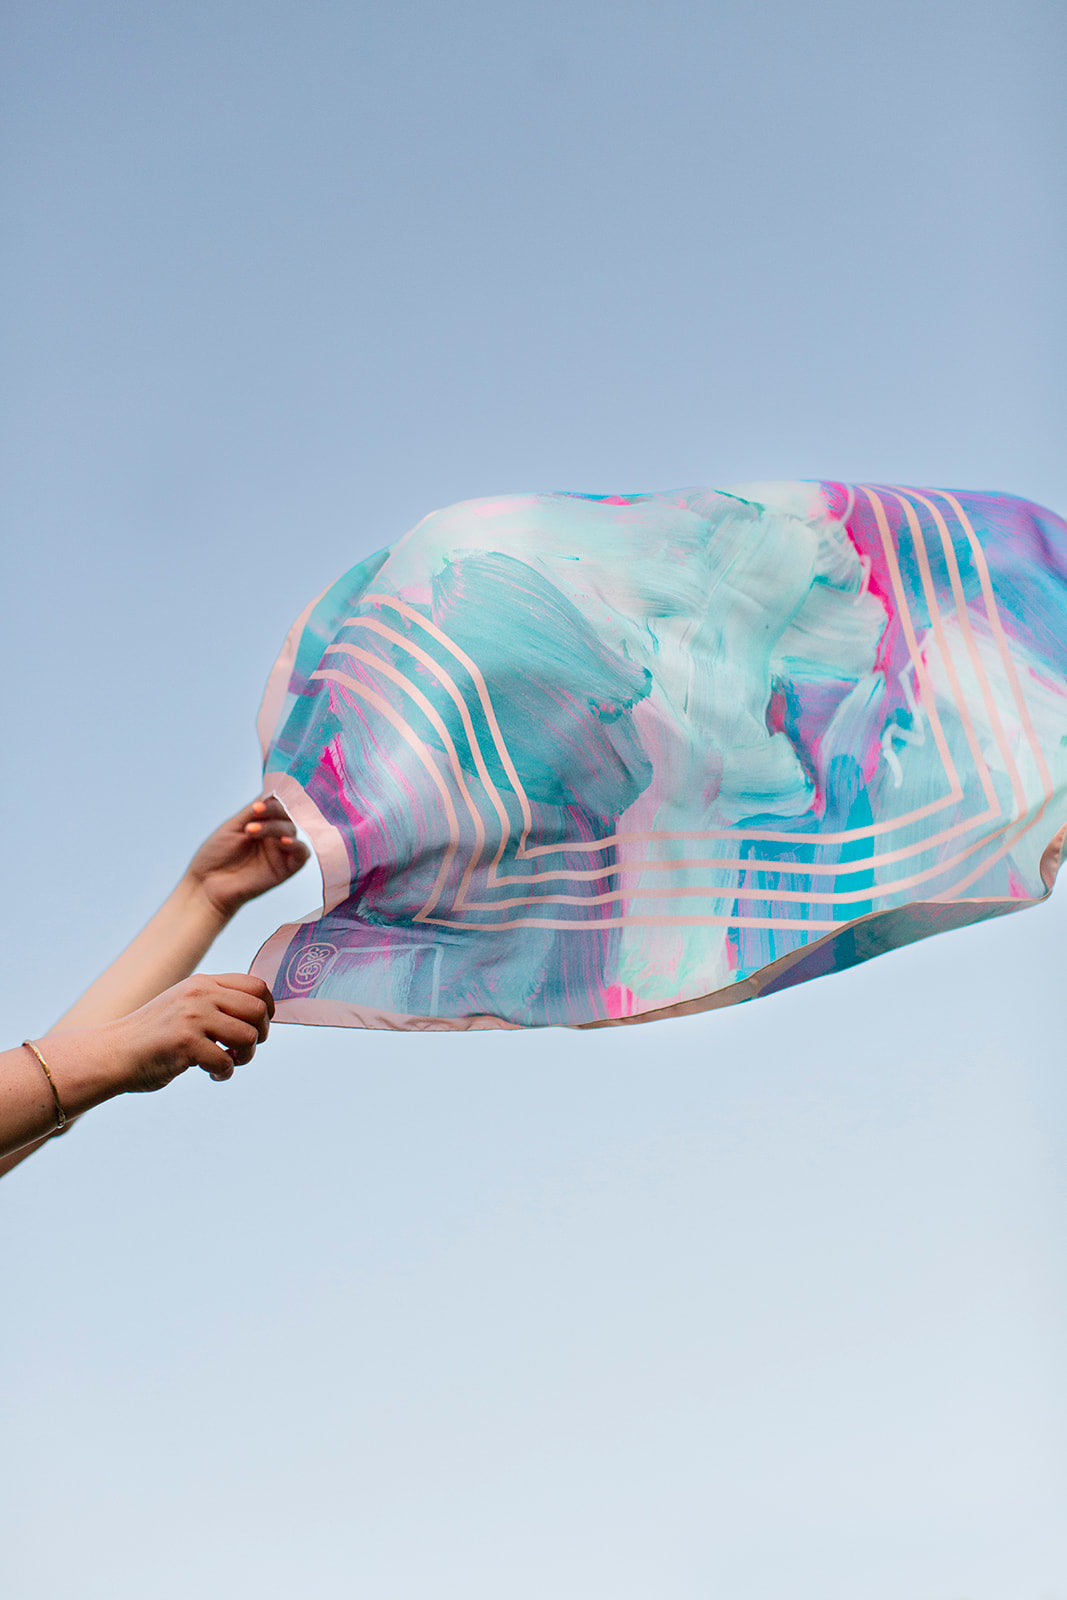 Sky Collection | Limited Edition Silk Scarves